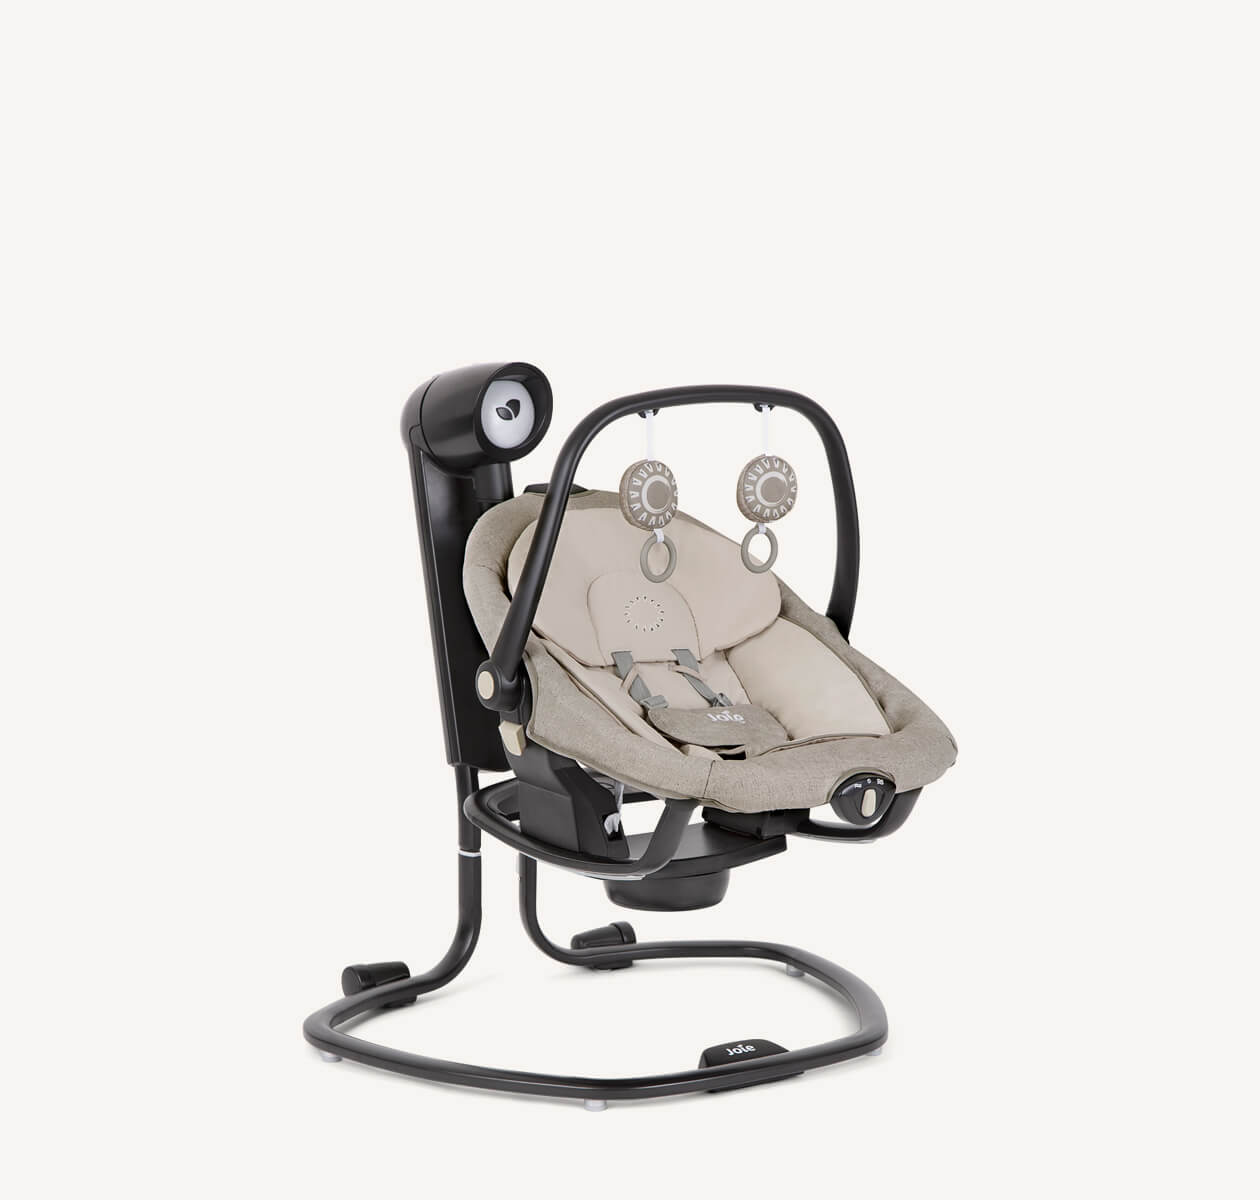 Serina 2in1 swing with a black frame and two tone tan seat pad, facing to the right at an angle.